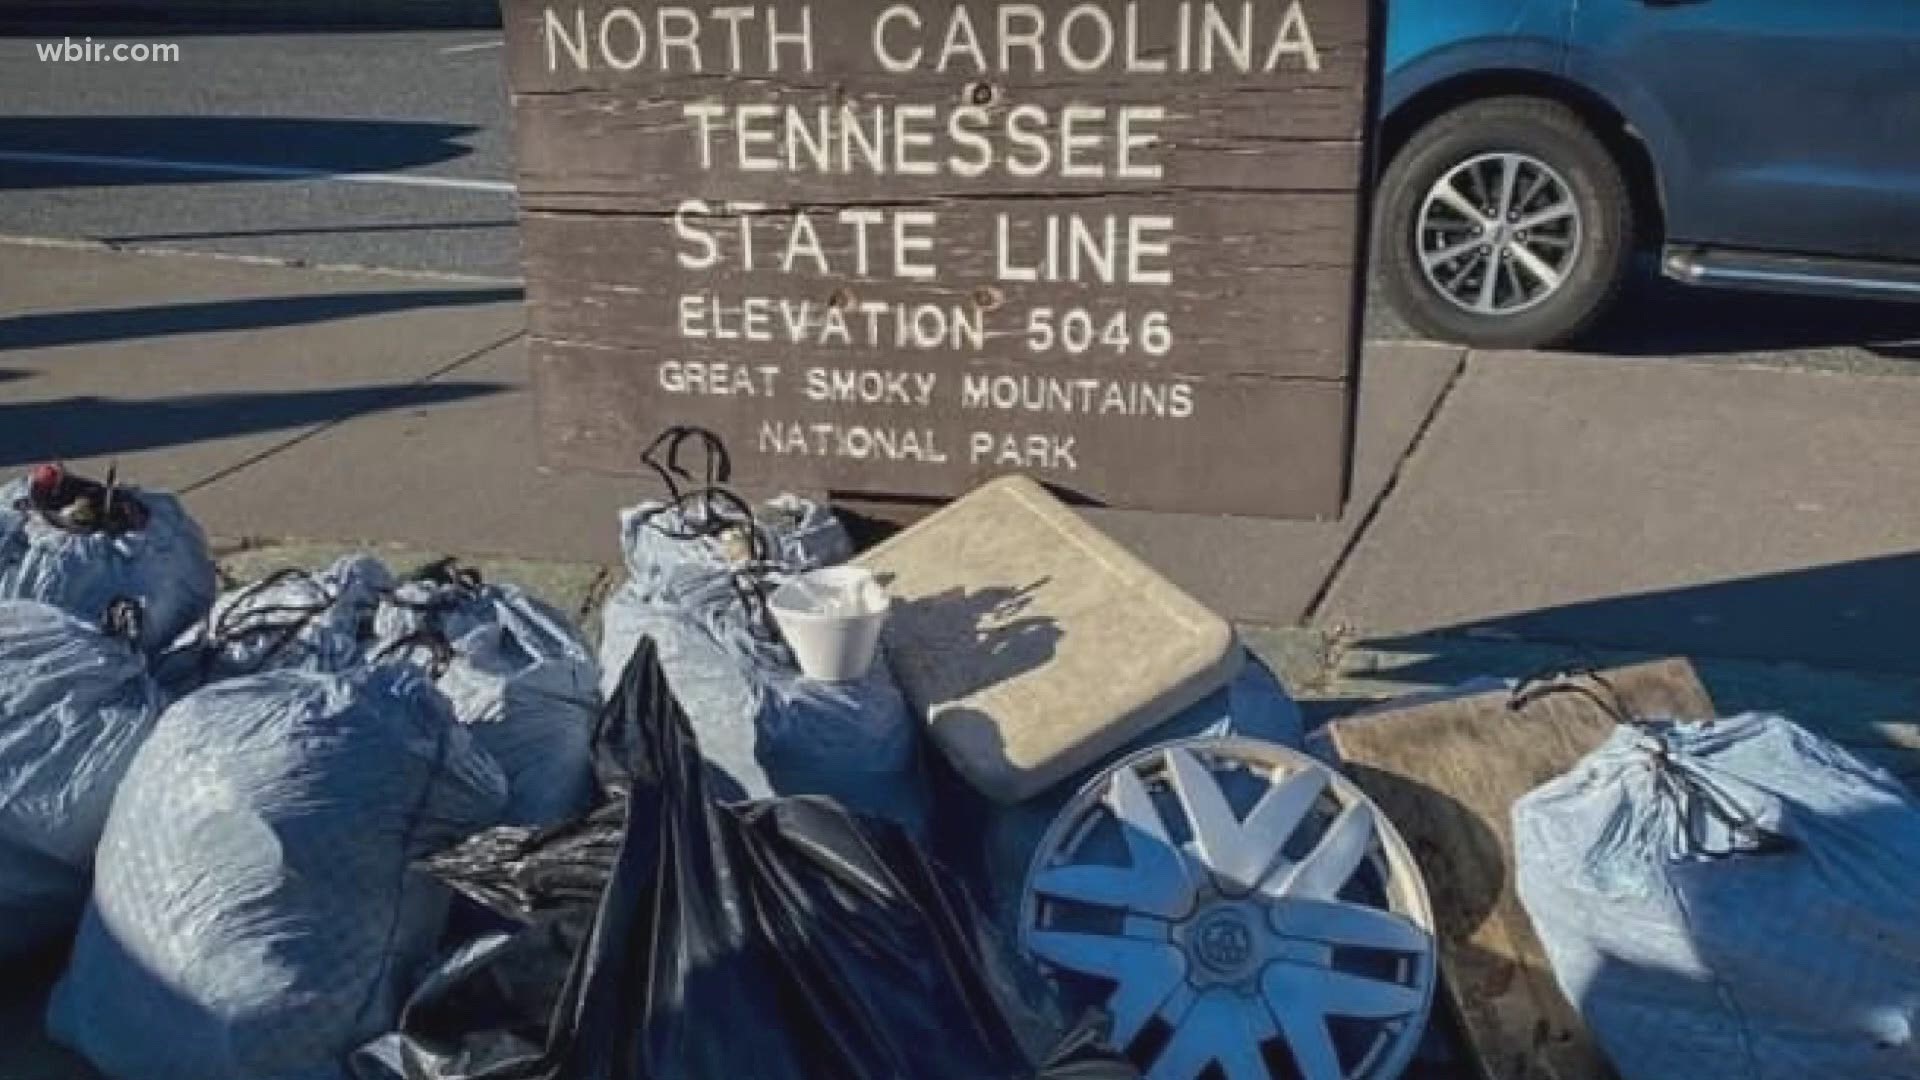 The Great Smoky Mountains National Park was named the most visited national park in 2019. However, more people means more trash.